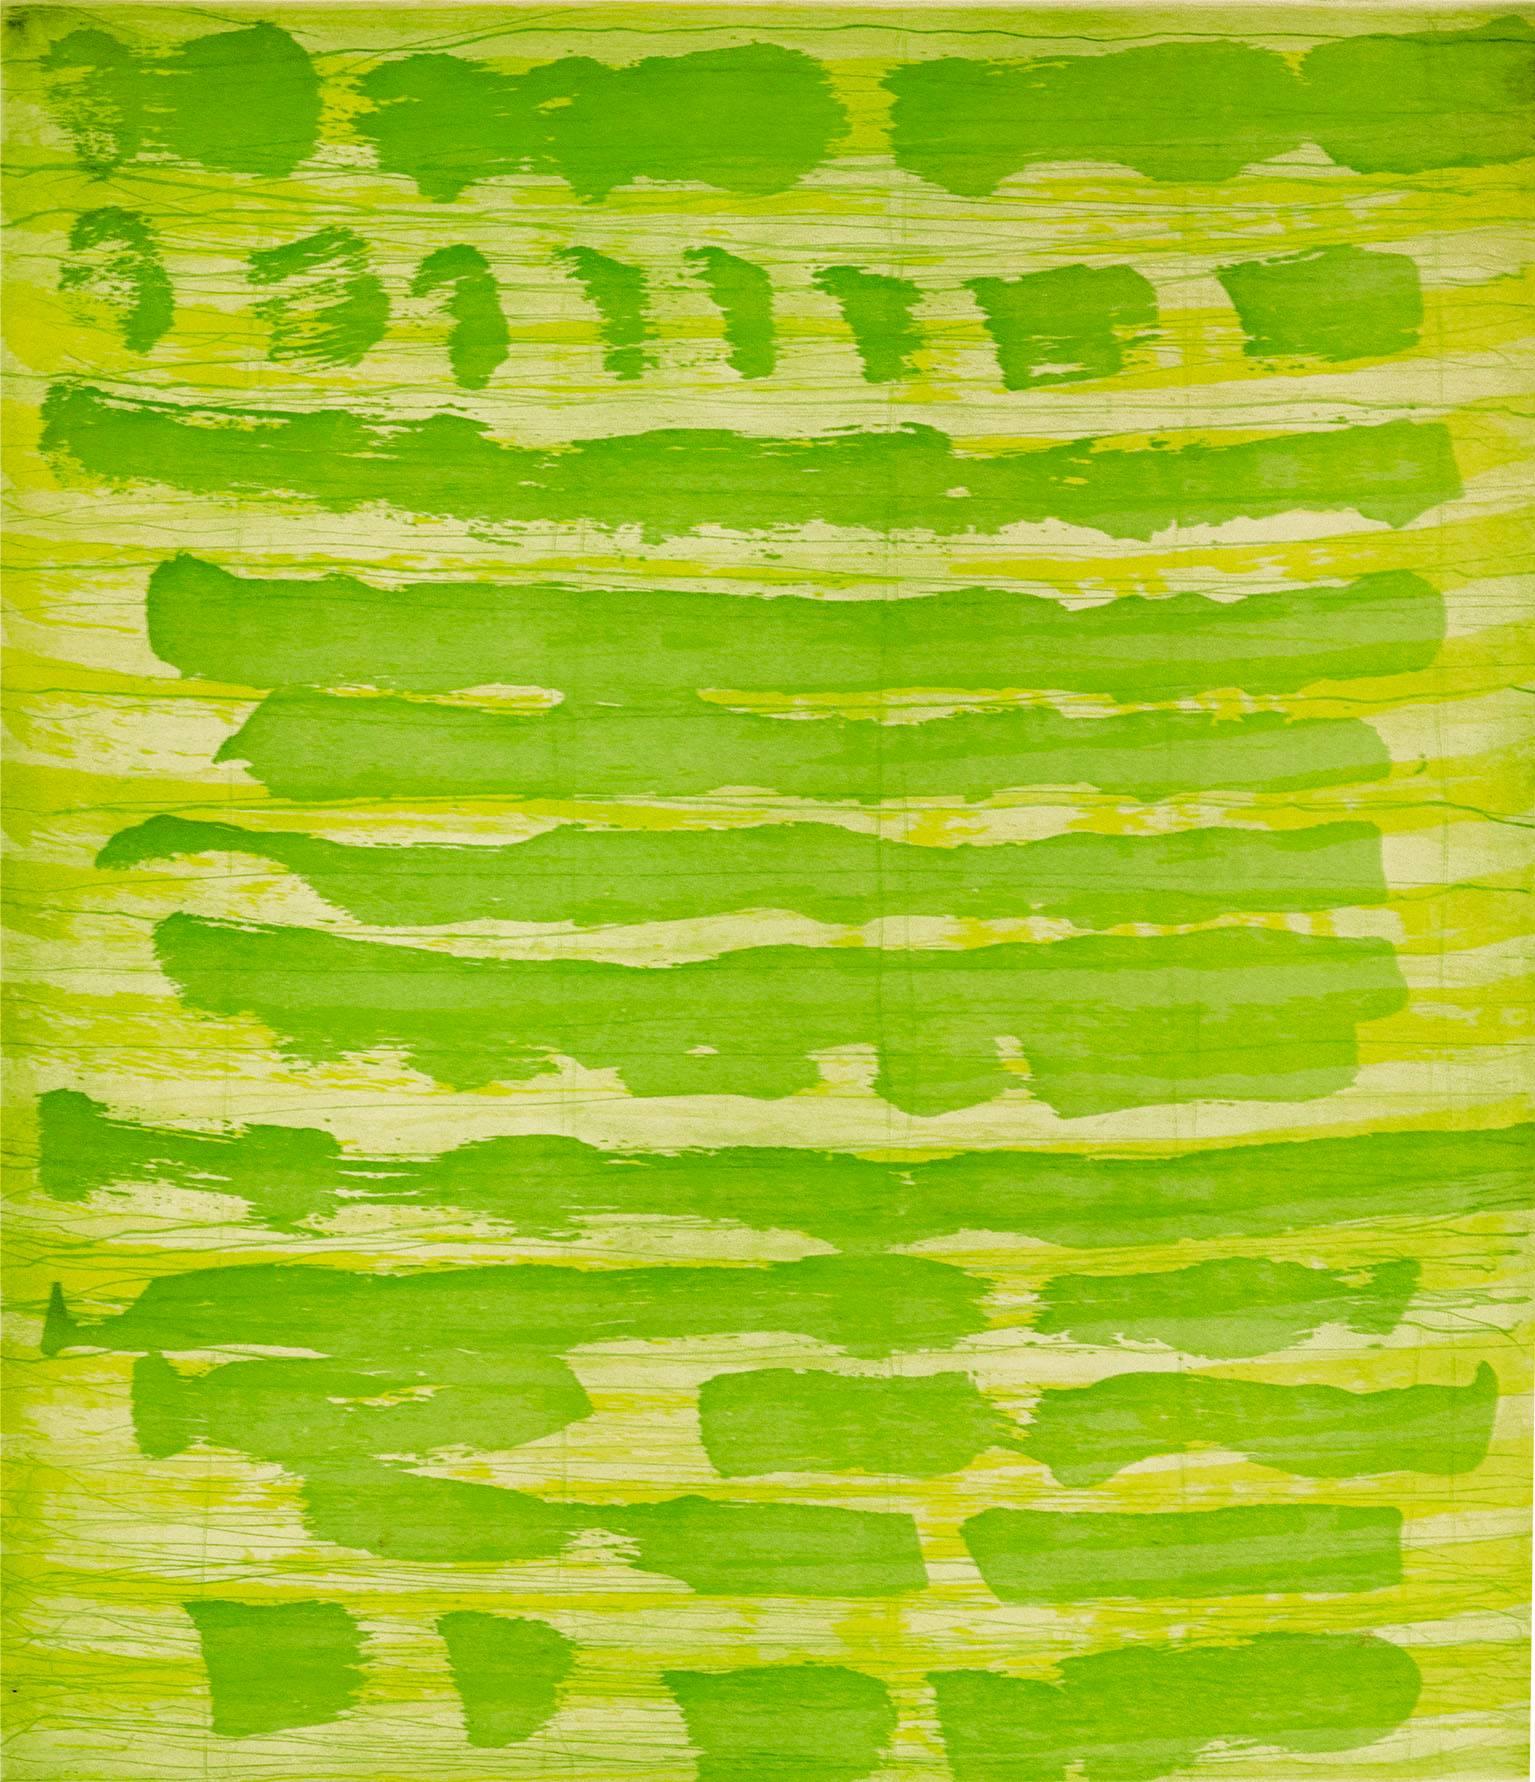 Emily Berger Abstract Print - "October 22", painterly abstract aquatint monoprint, layered yellow and green. 